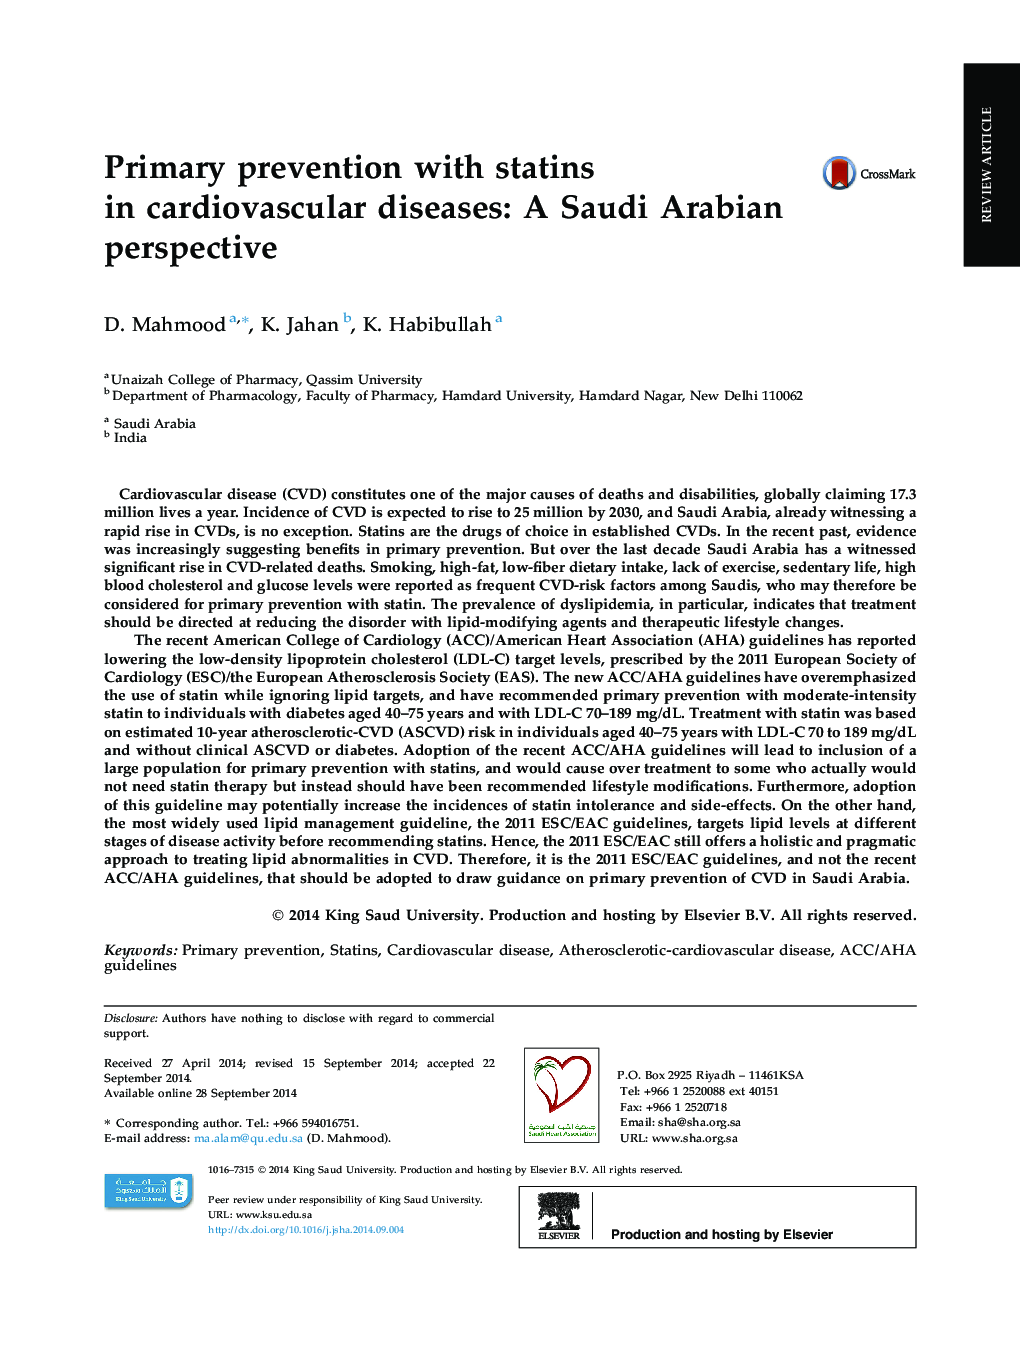 Primary prevention with statins in cardiovascular diseases: A Saudi Arabian perspective 